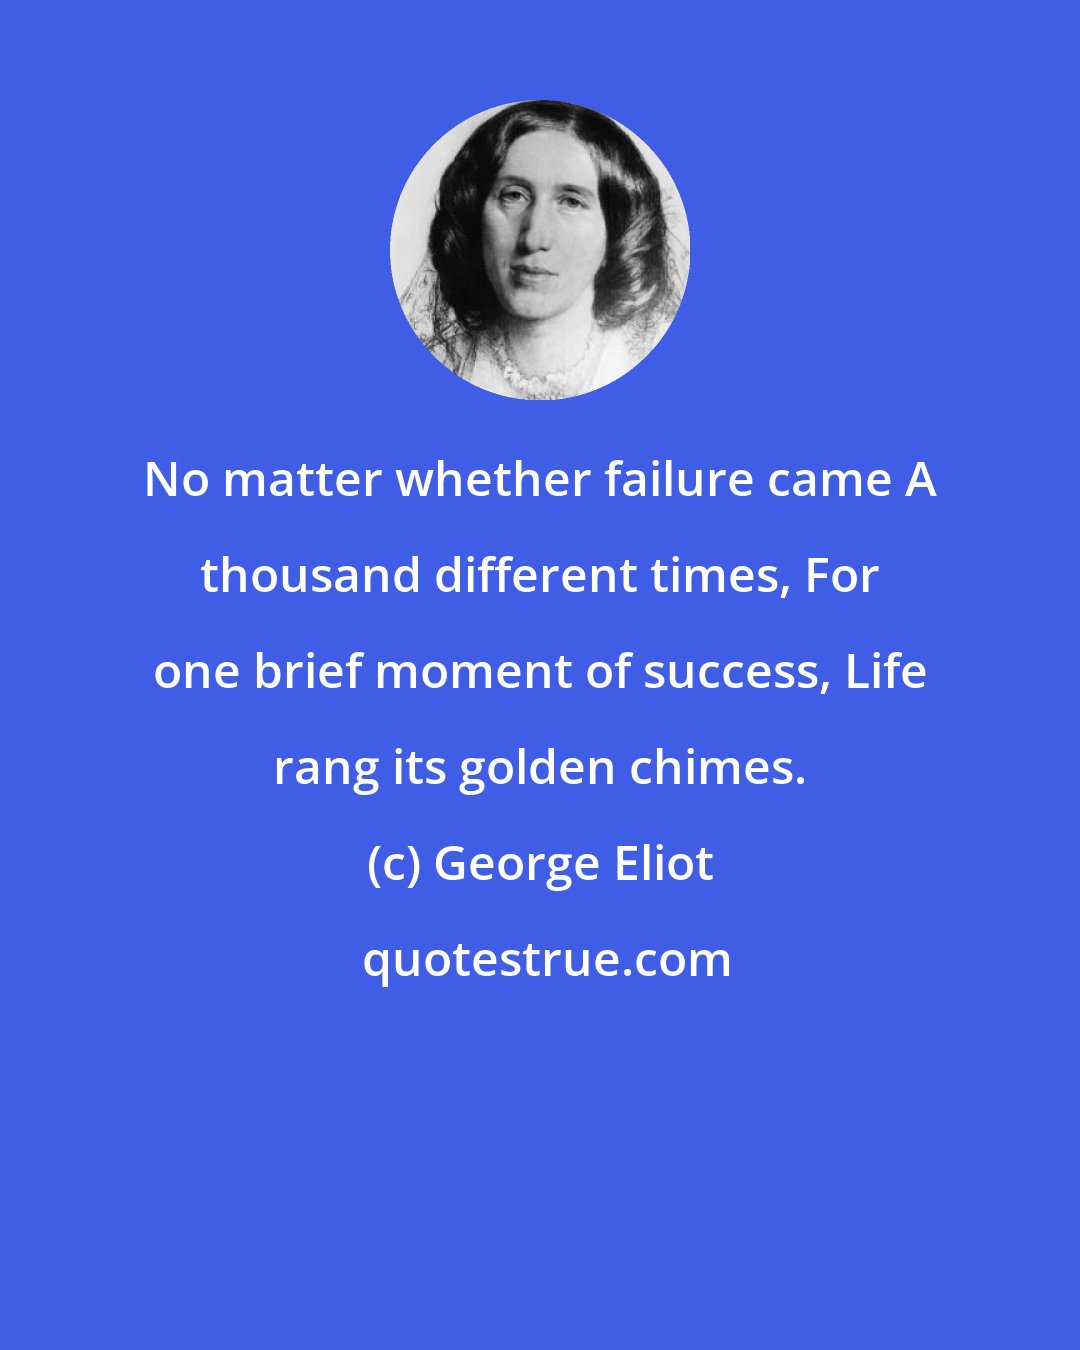 George Eliot: No matter whether failure came A thousand different times, For one brief moment of success, Life rang its golden chimes.